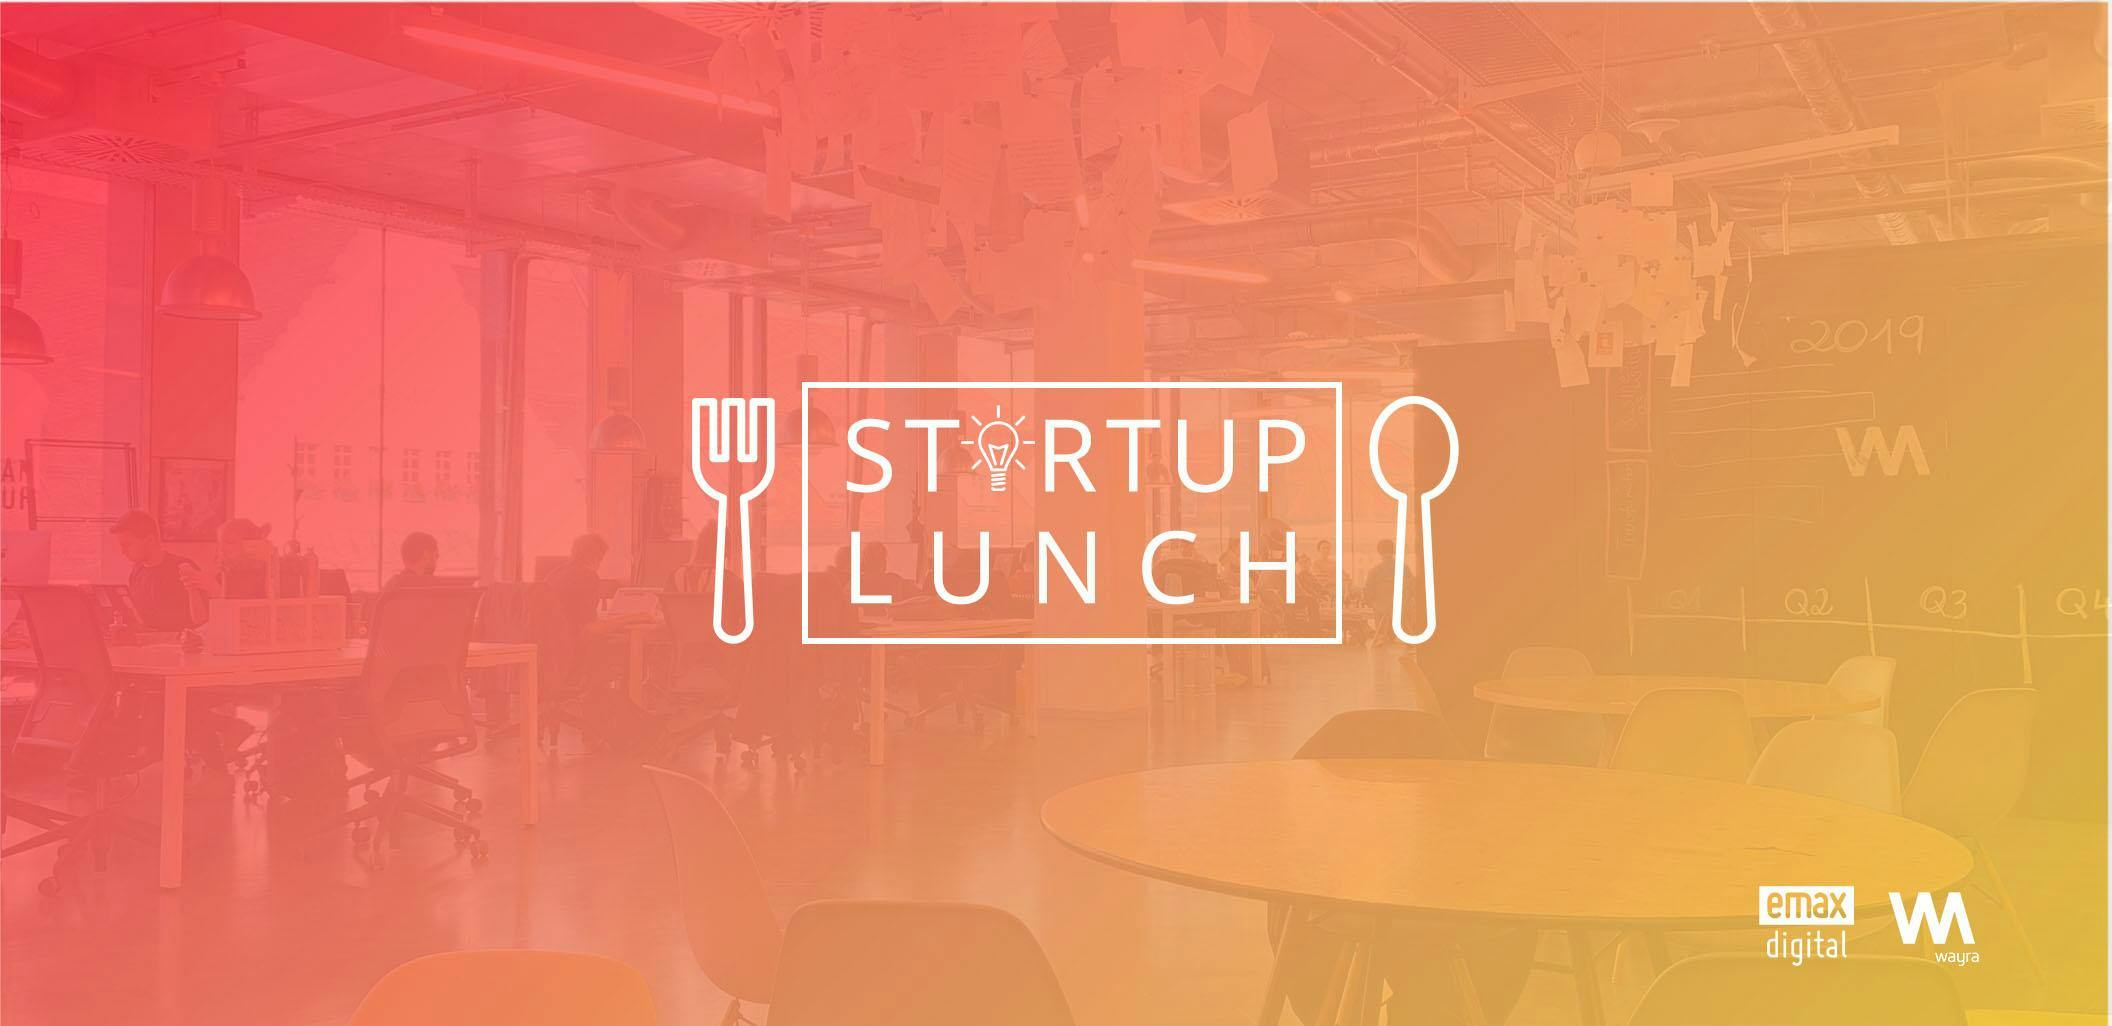 Startup Lunch I NEED MONEY